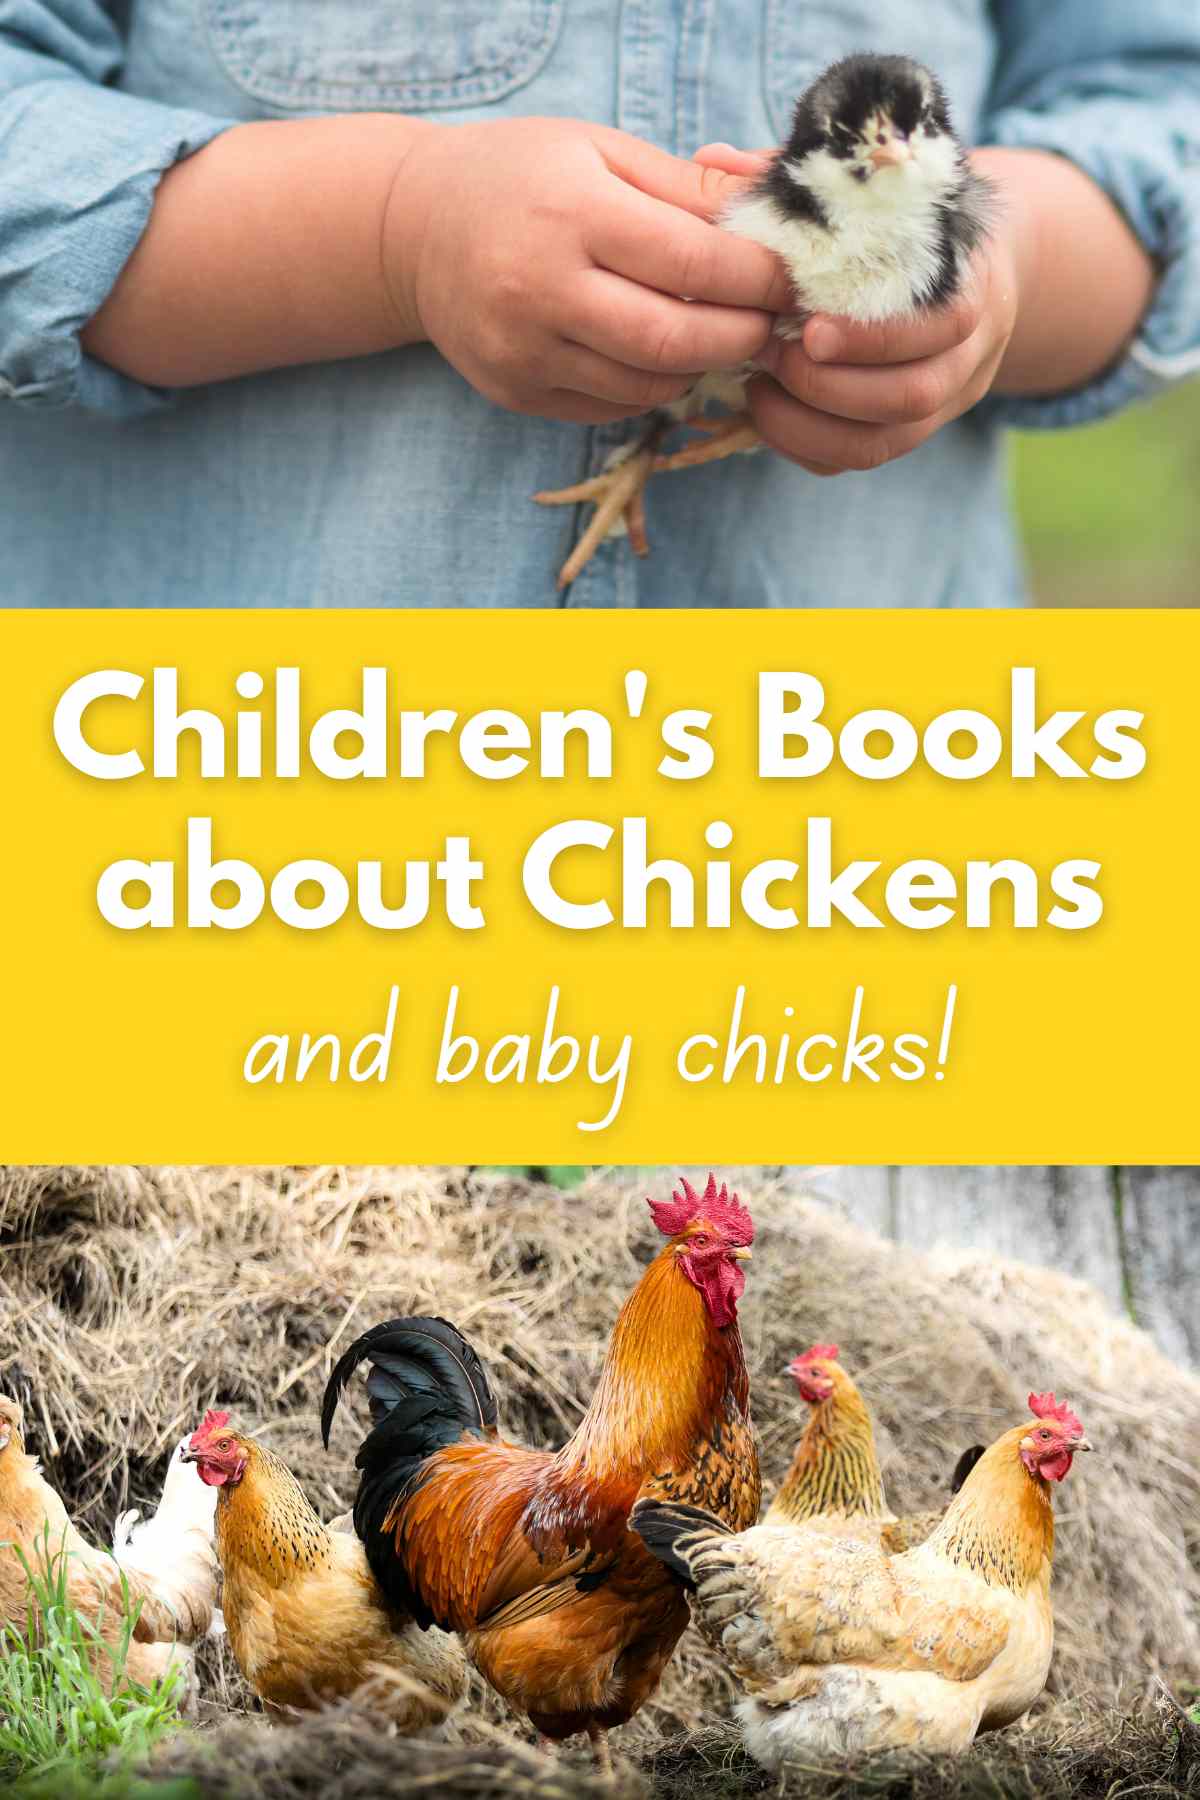 Child wearing a jean shirt holding a baby chicken at the top and a rooster with laying hens at the bottom. Yellow rectangle between both pictures with white text overlay.